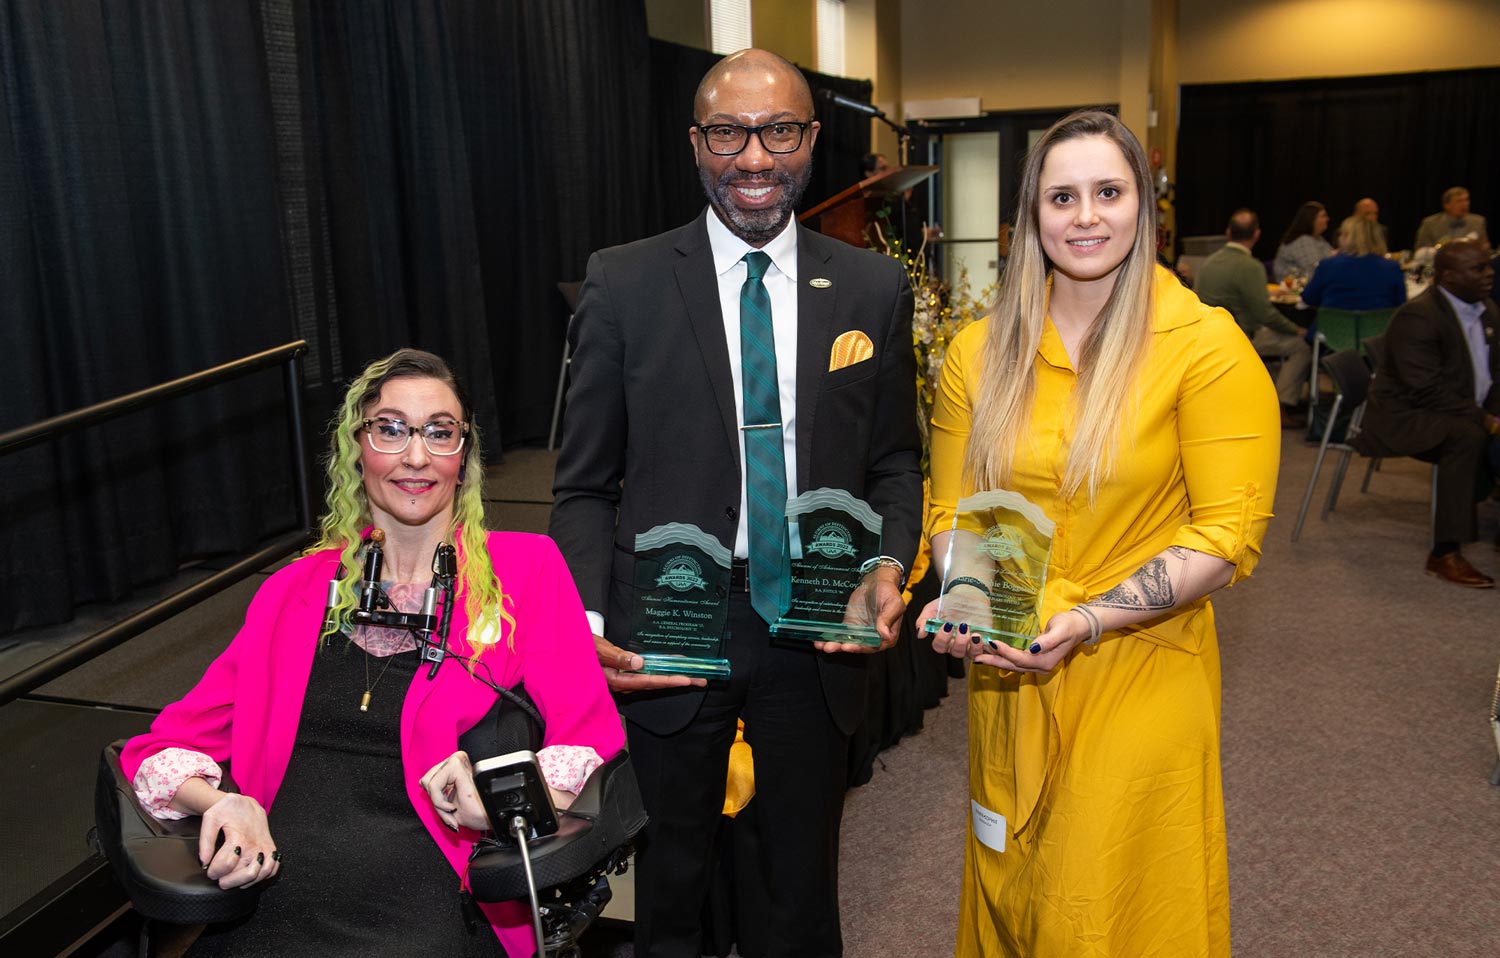 Maggie Winston wearing a black dress and a hot pink blazer (left), Kenneth McCoy wearing a black suit and blue tie(center) and Marie-Sophie Boggasch wearing a vibrant yellow dress (right) stand near the stage holding their glass awards at the 2022 Alumni of Distinction Celebration Banquet 